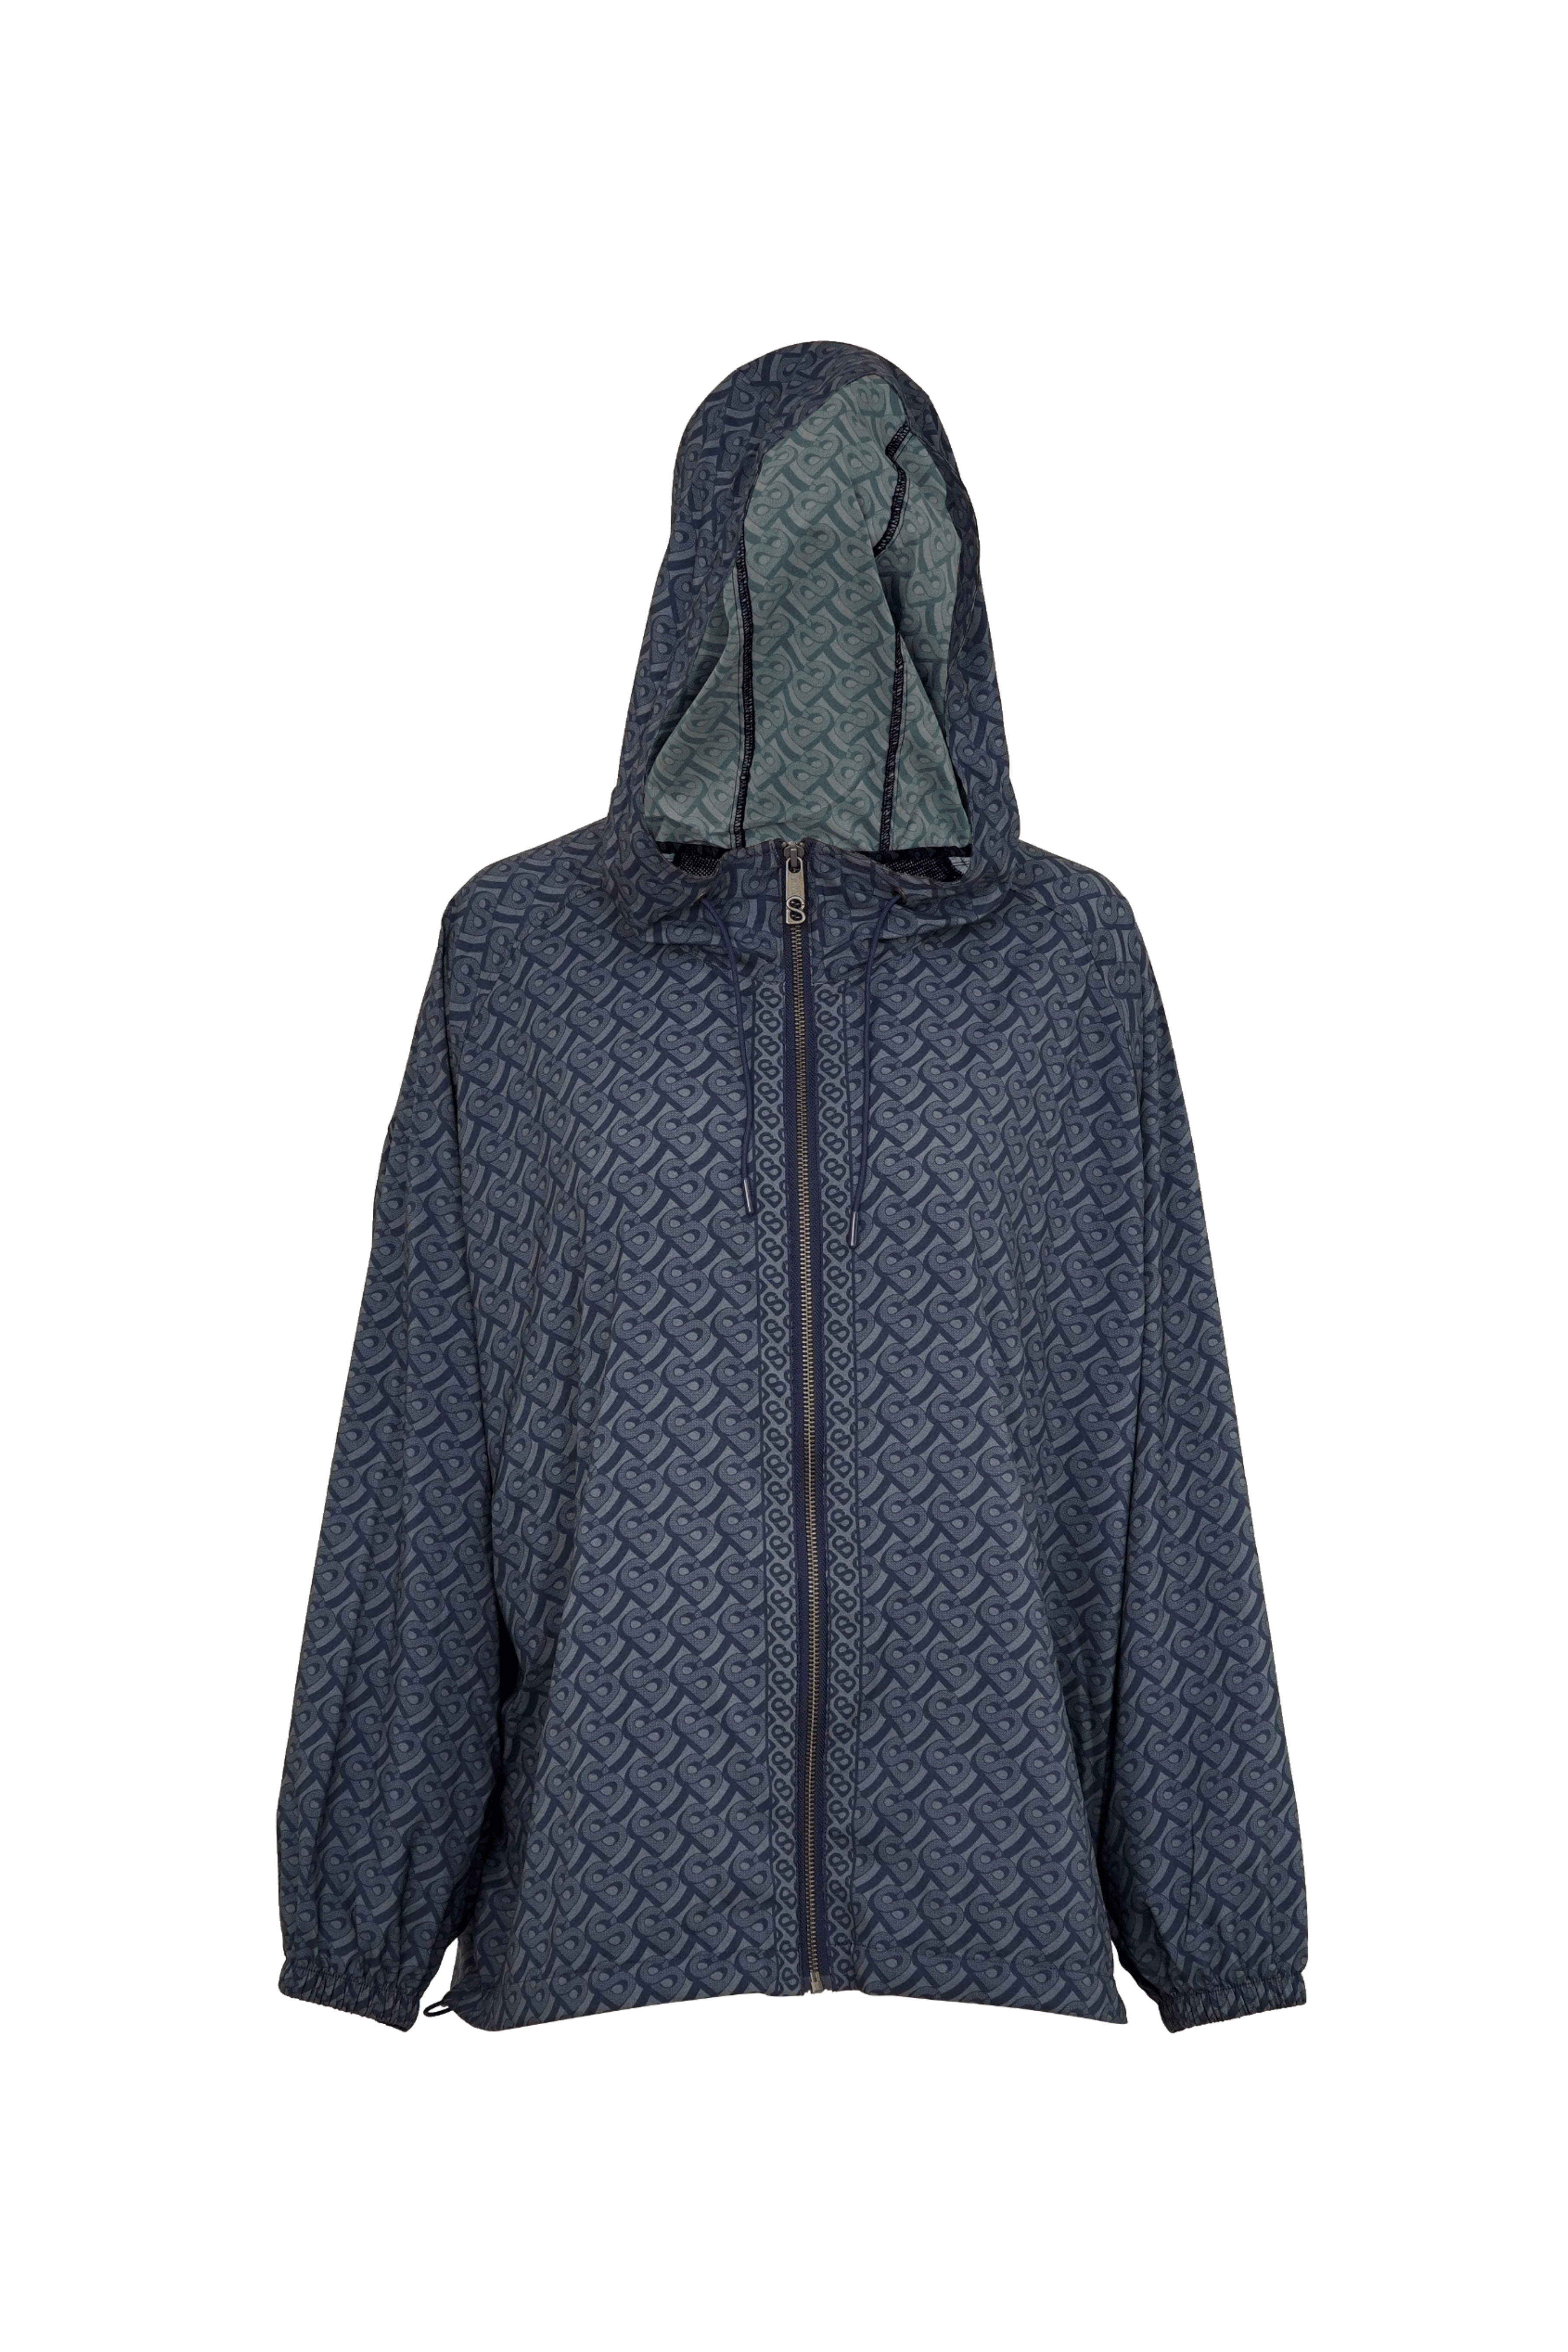 LAICA x Buttonscarves Athleisure Oversize Air Jacket - Navy